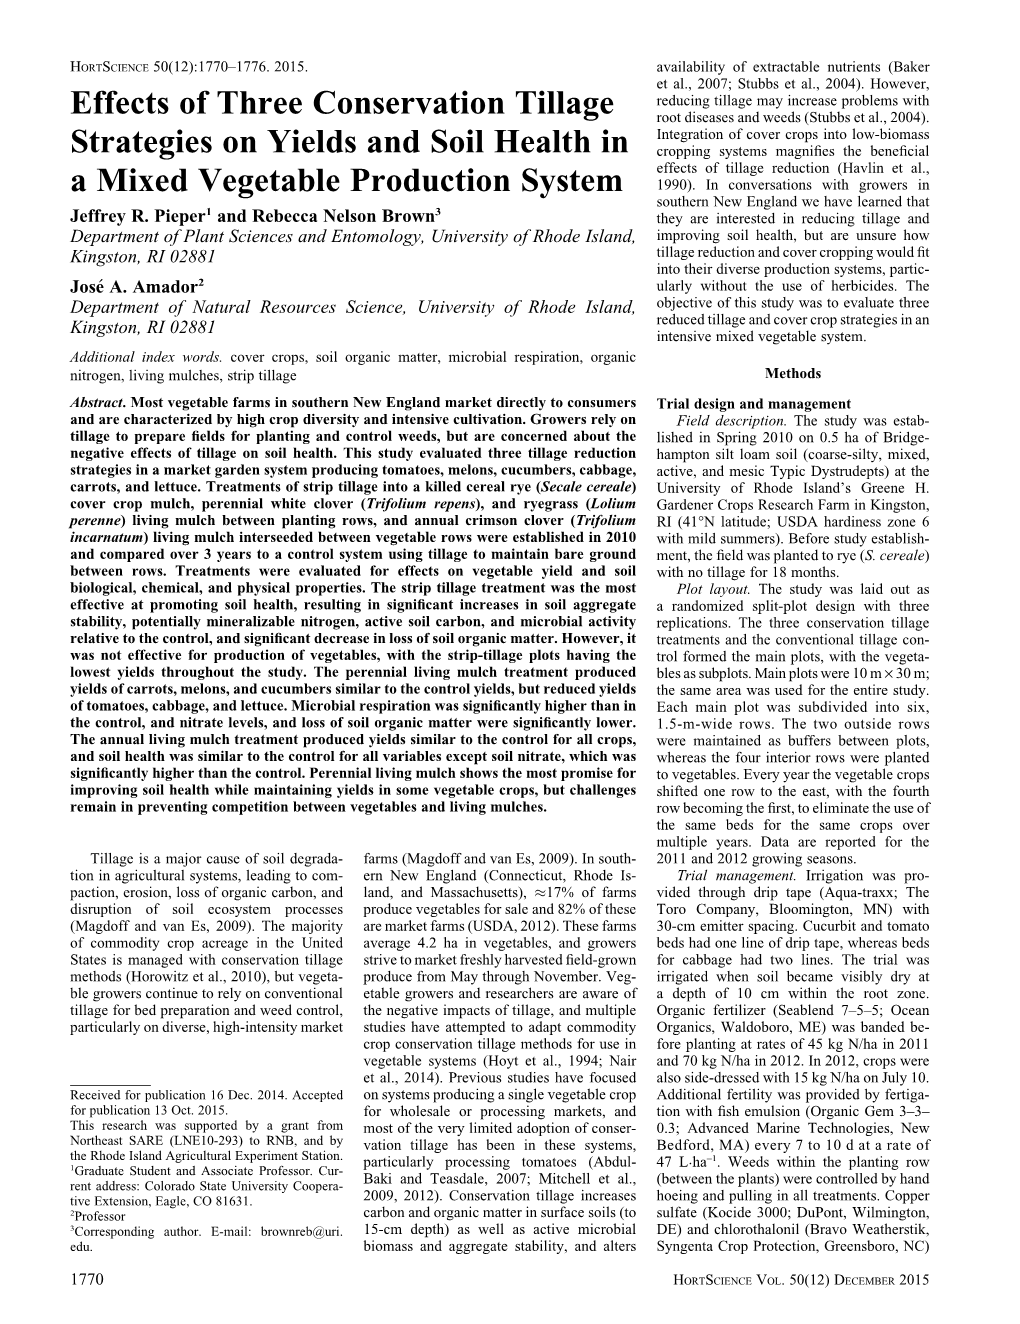 Effects of Three Conservation Tillage Strategies on Yields and Soil Health in a Mixed Vegetable Production System